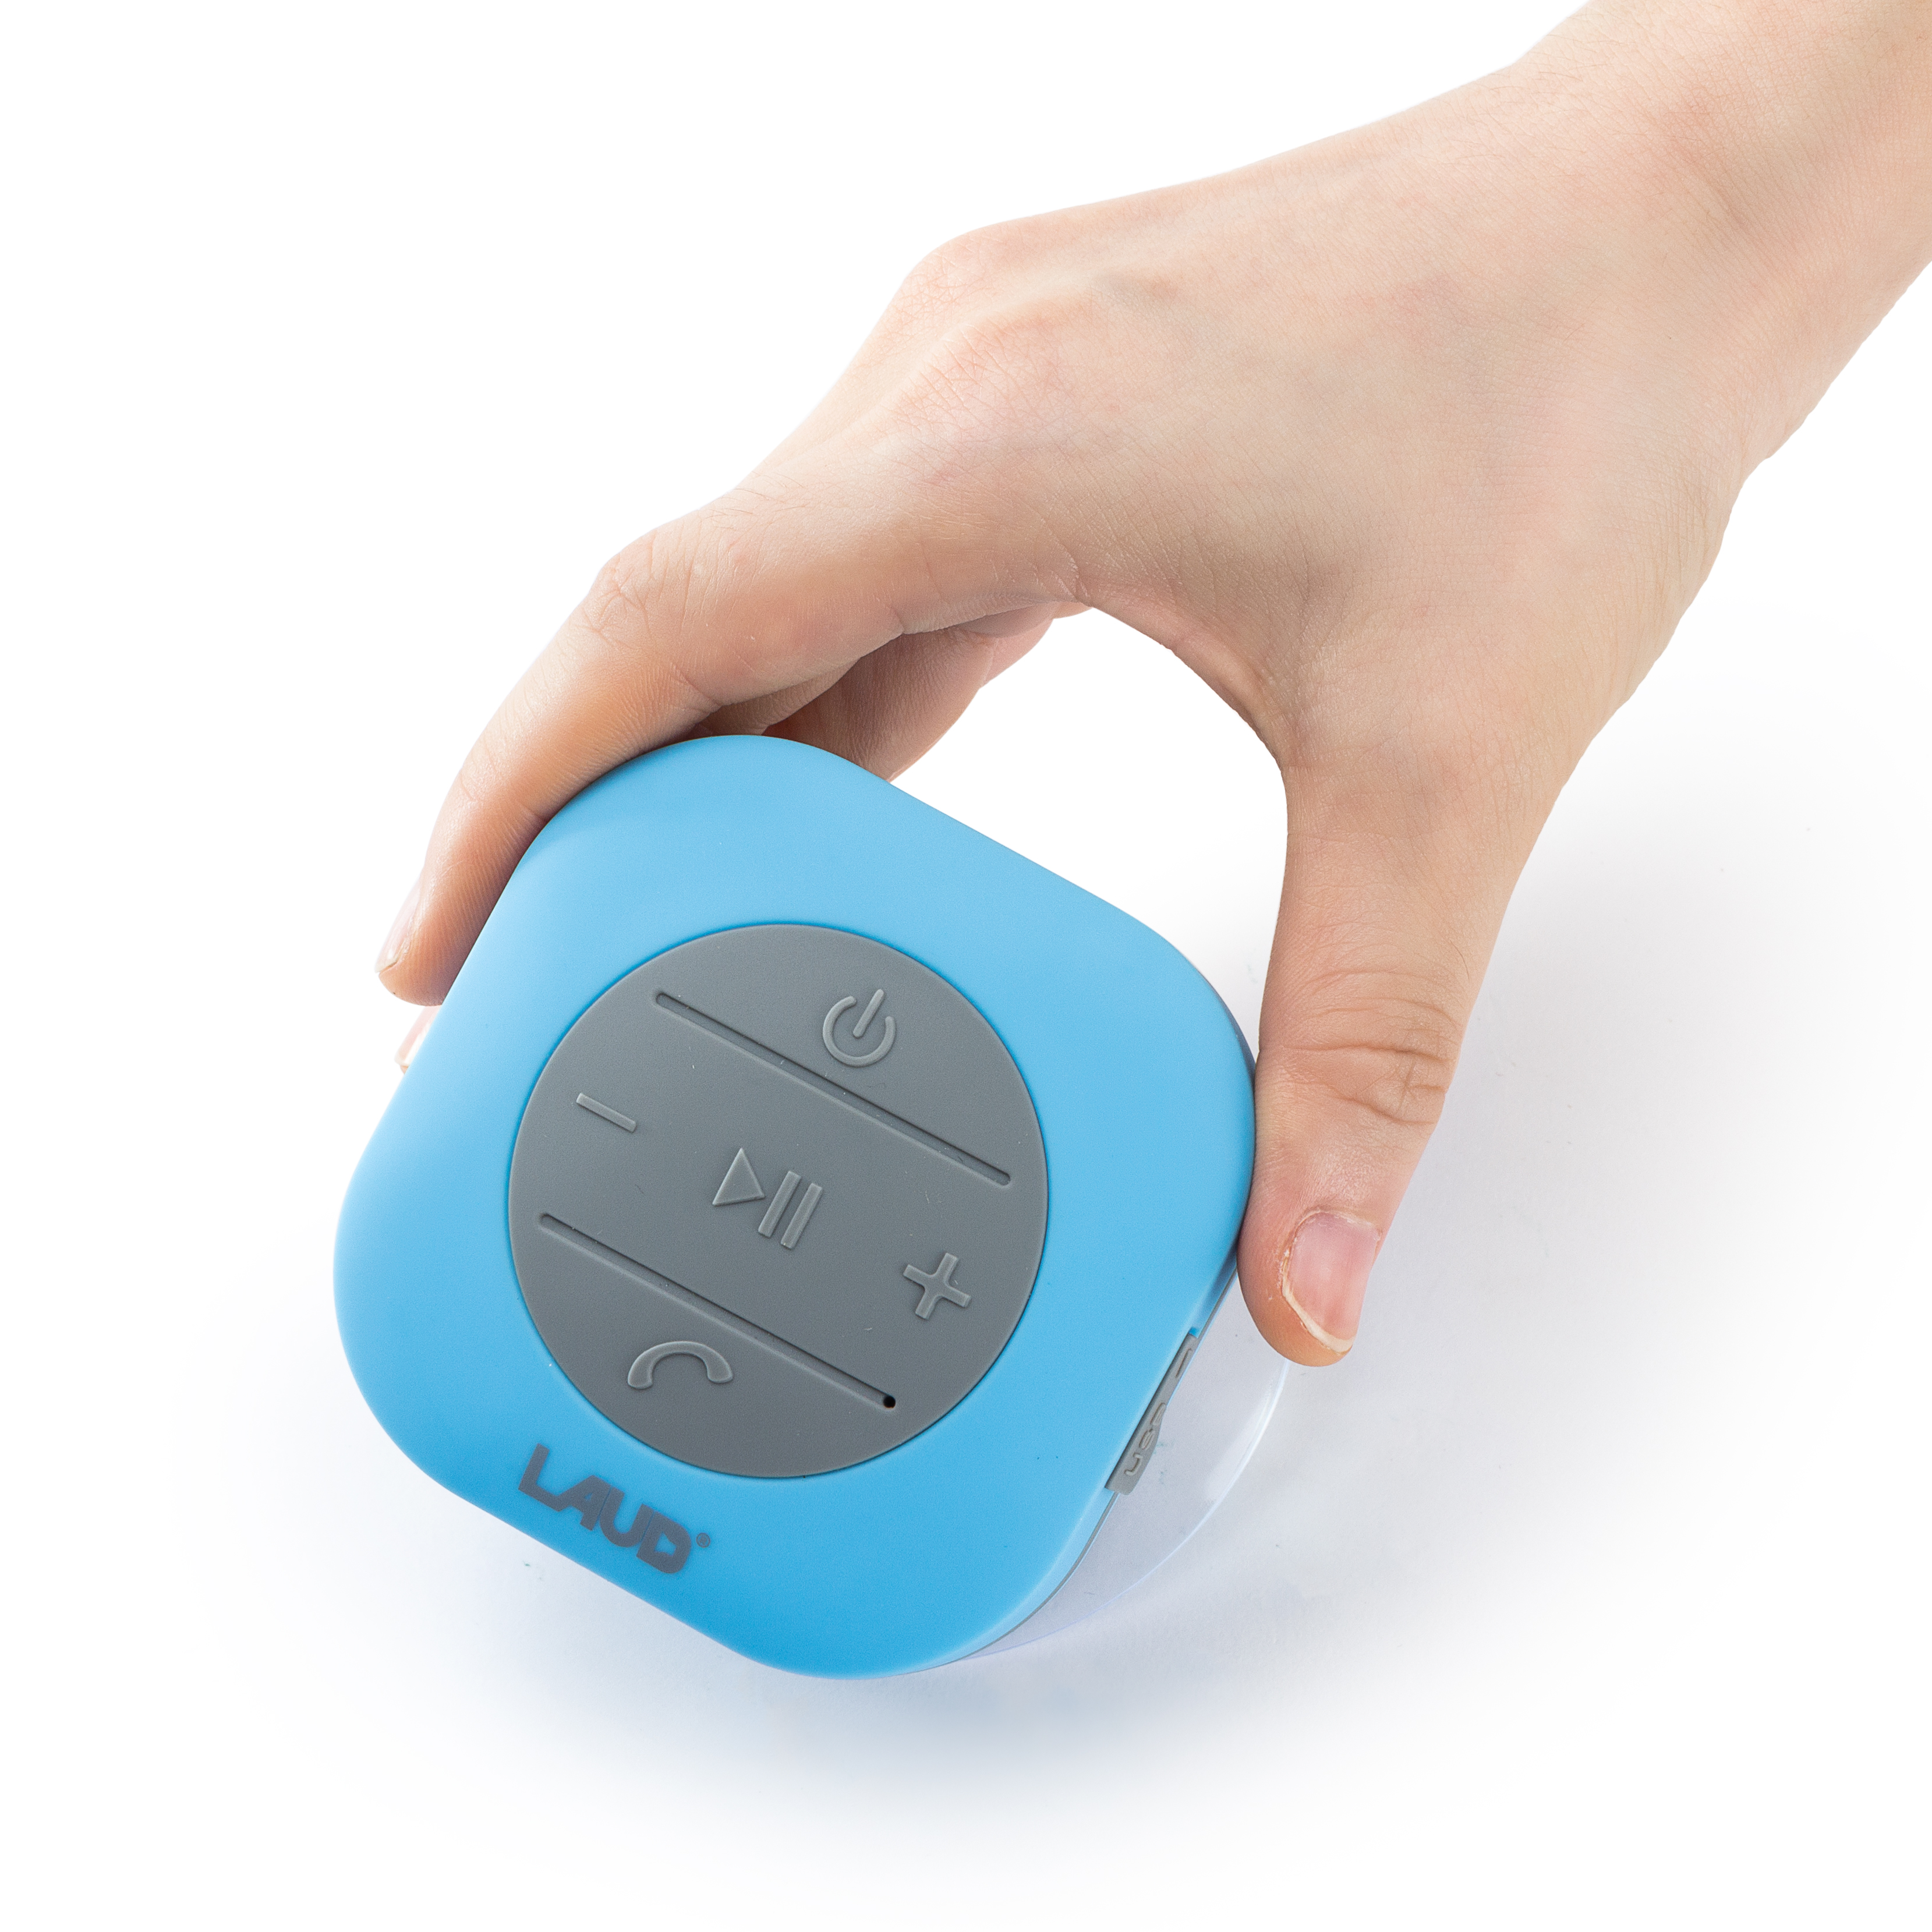 Laud Portable Wireless Shower Speaker ? IPX4 Waterproof ? Super Strong Suction Cup - Built-in Mic For Hands free Callinge - Water Resistant Rubber Coating - image 4 of 6